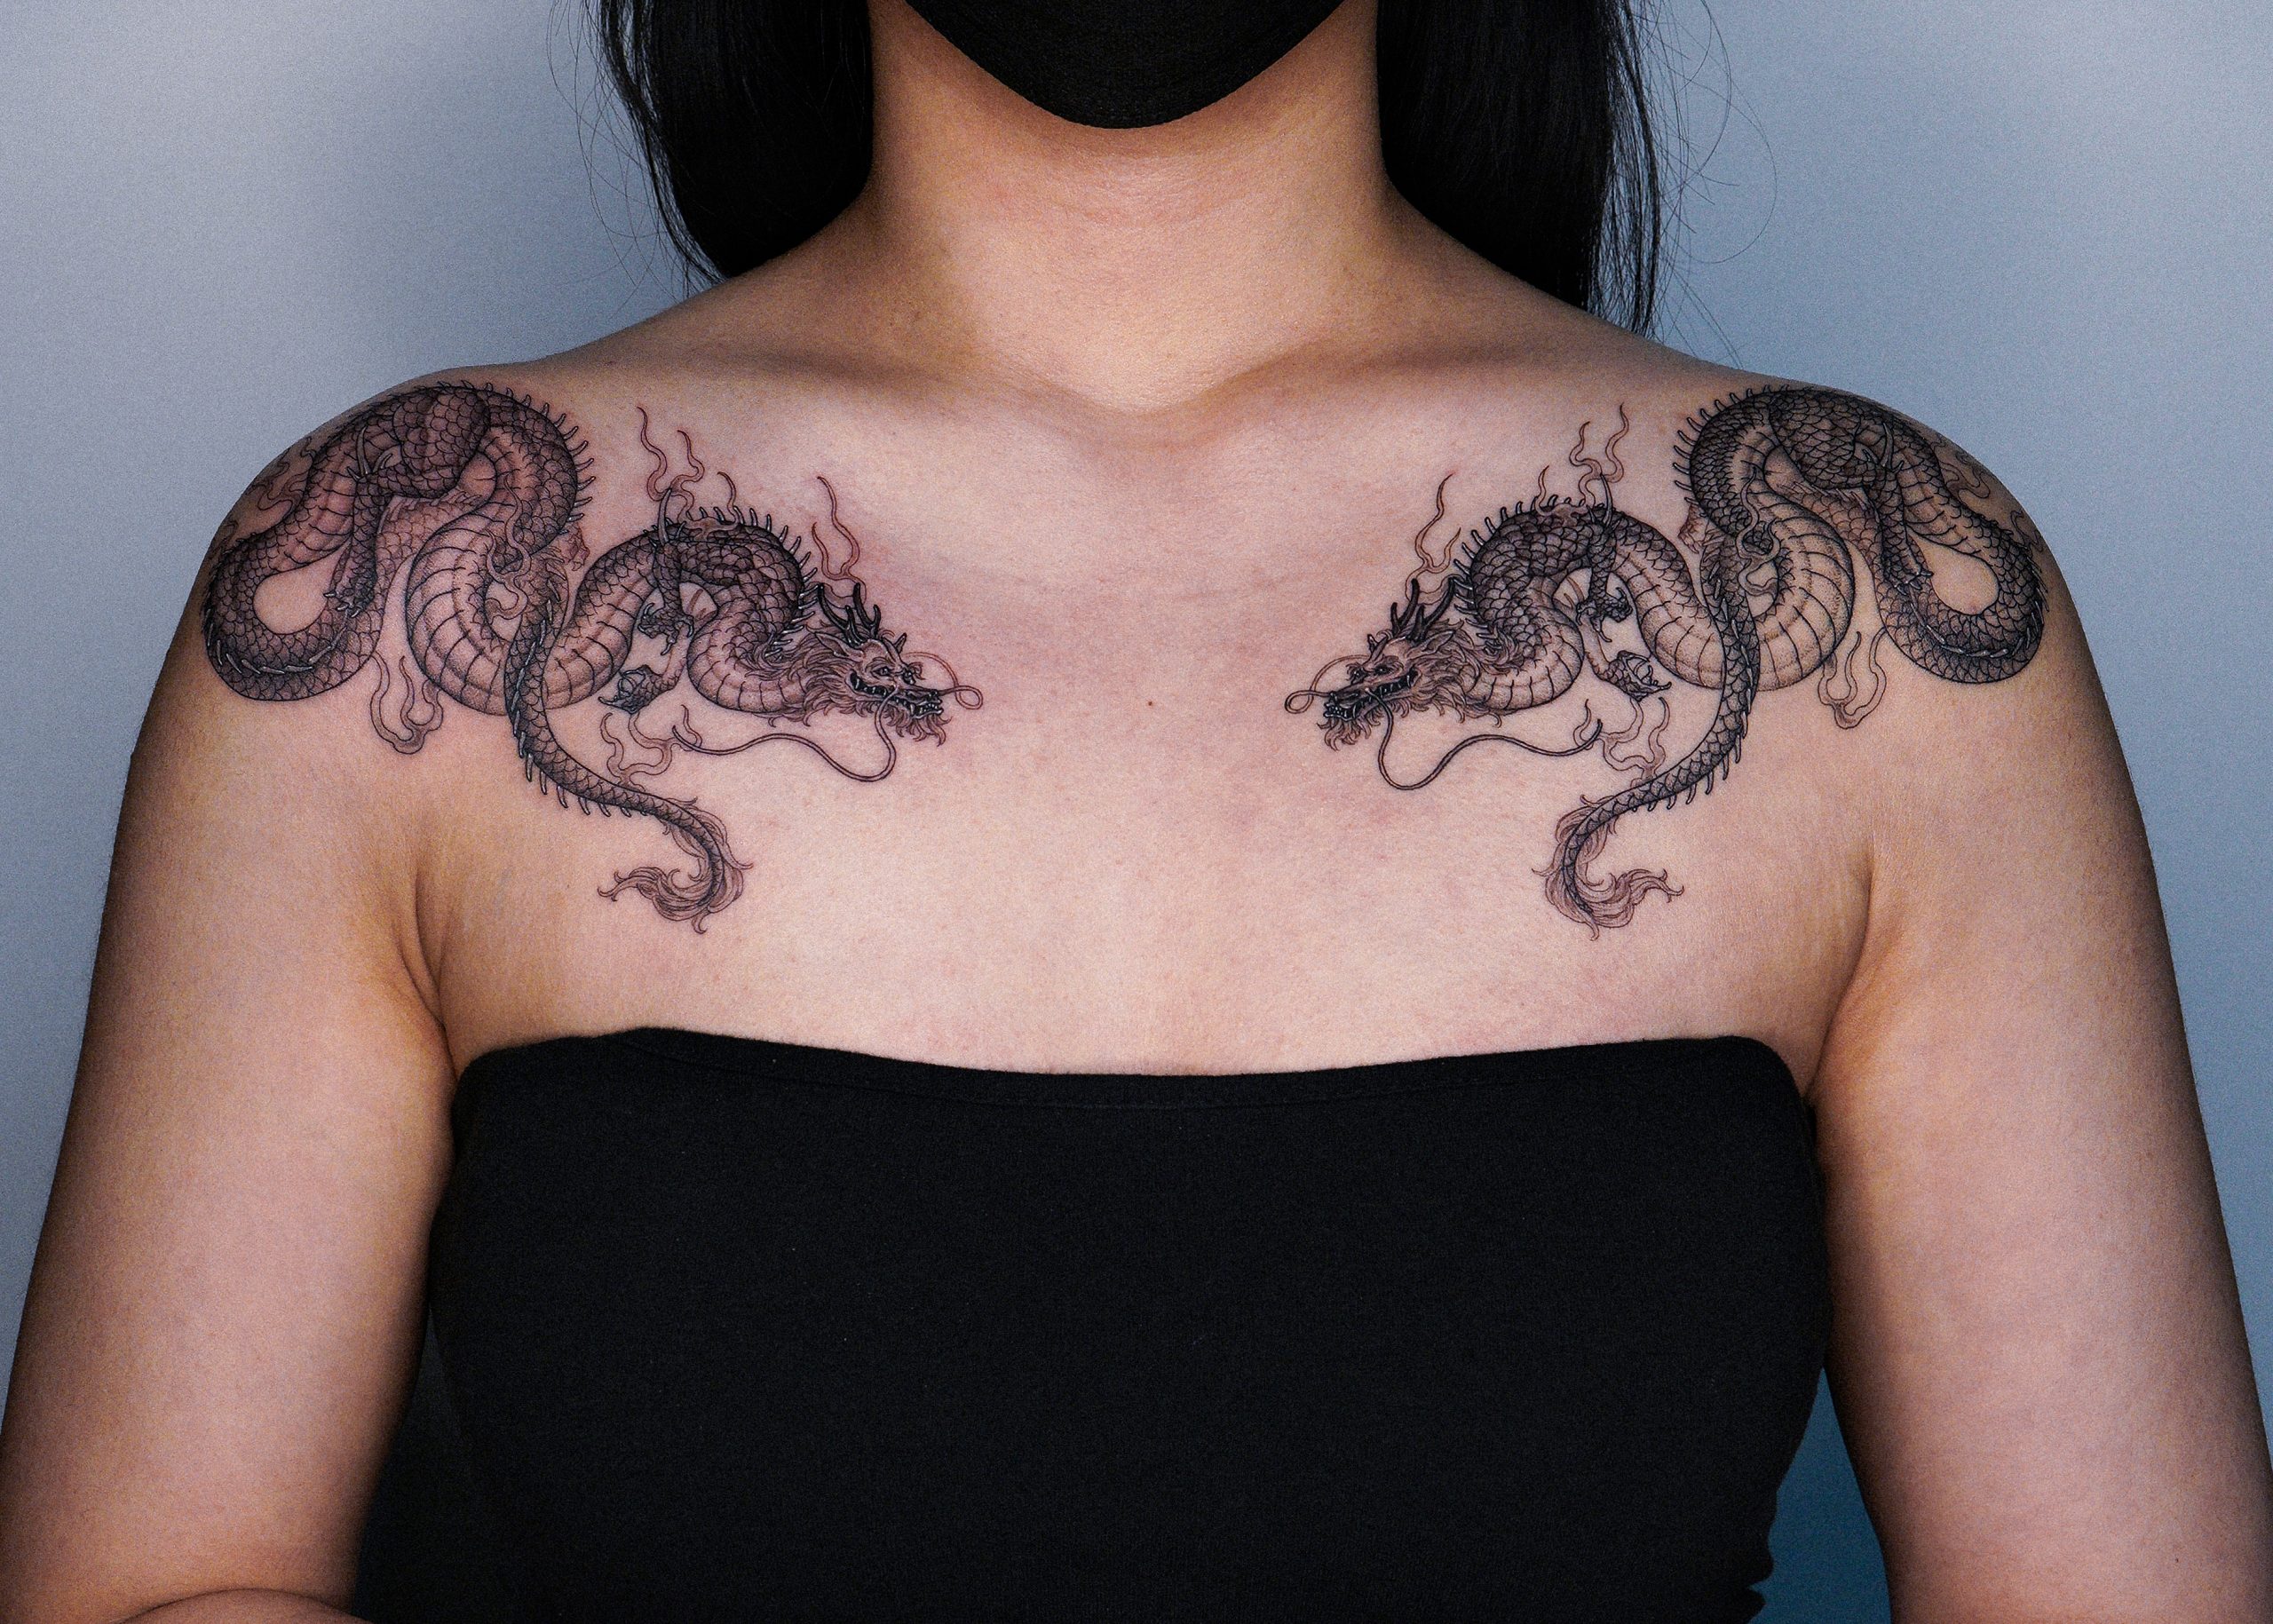 101 Best Dragon Chest Tattoo Ideas You'll Have To See To Believe!